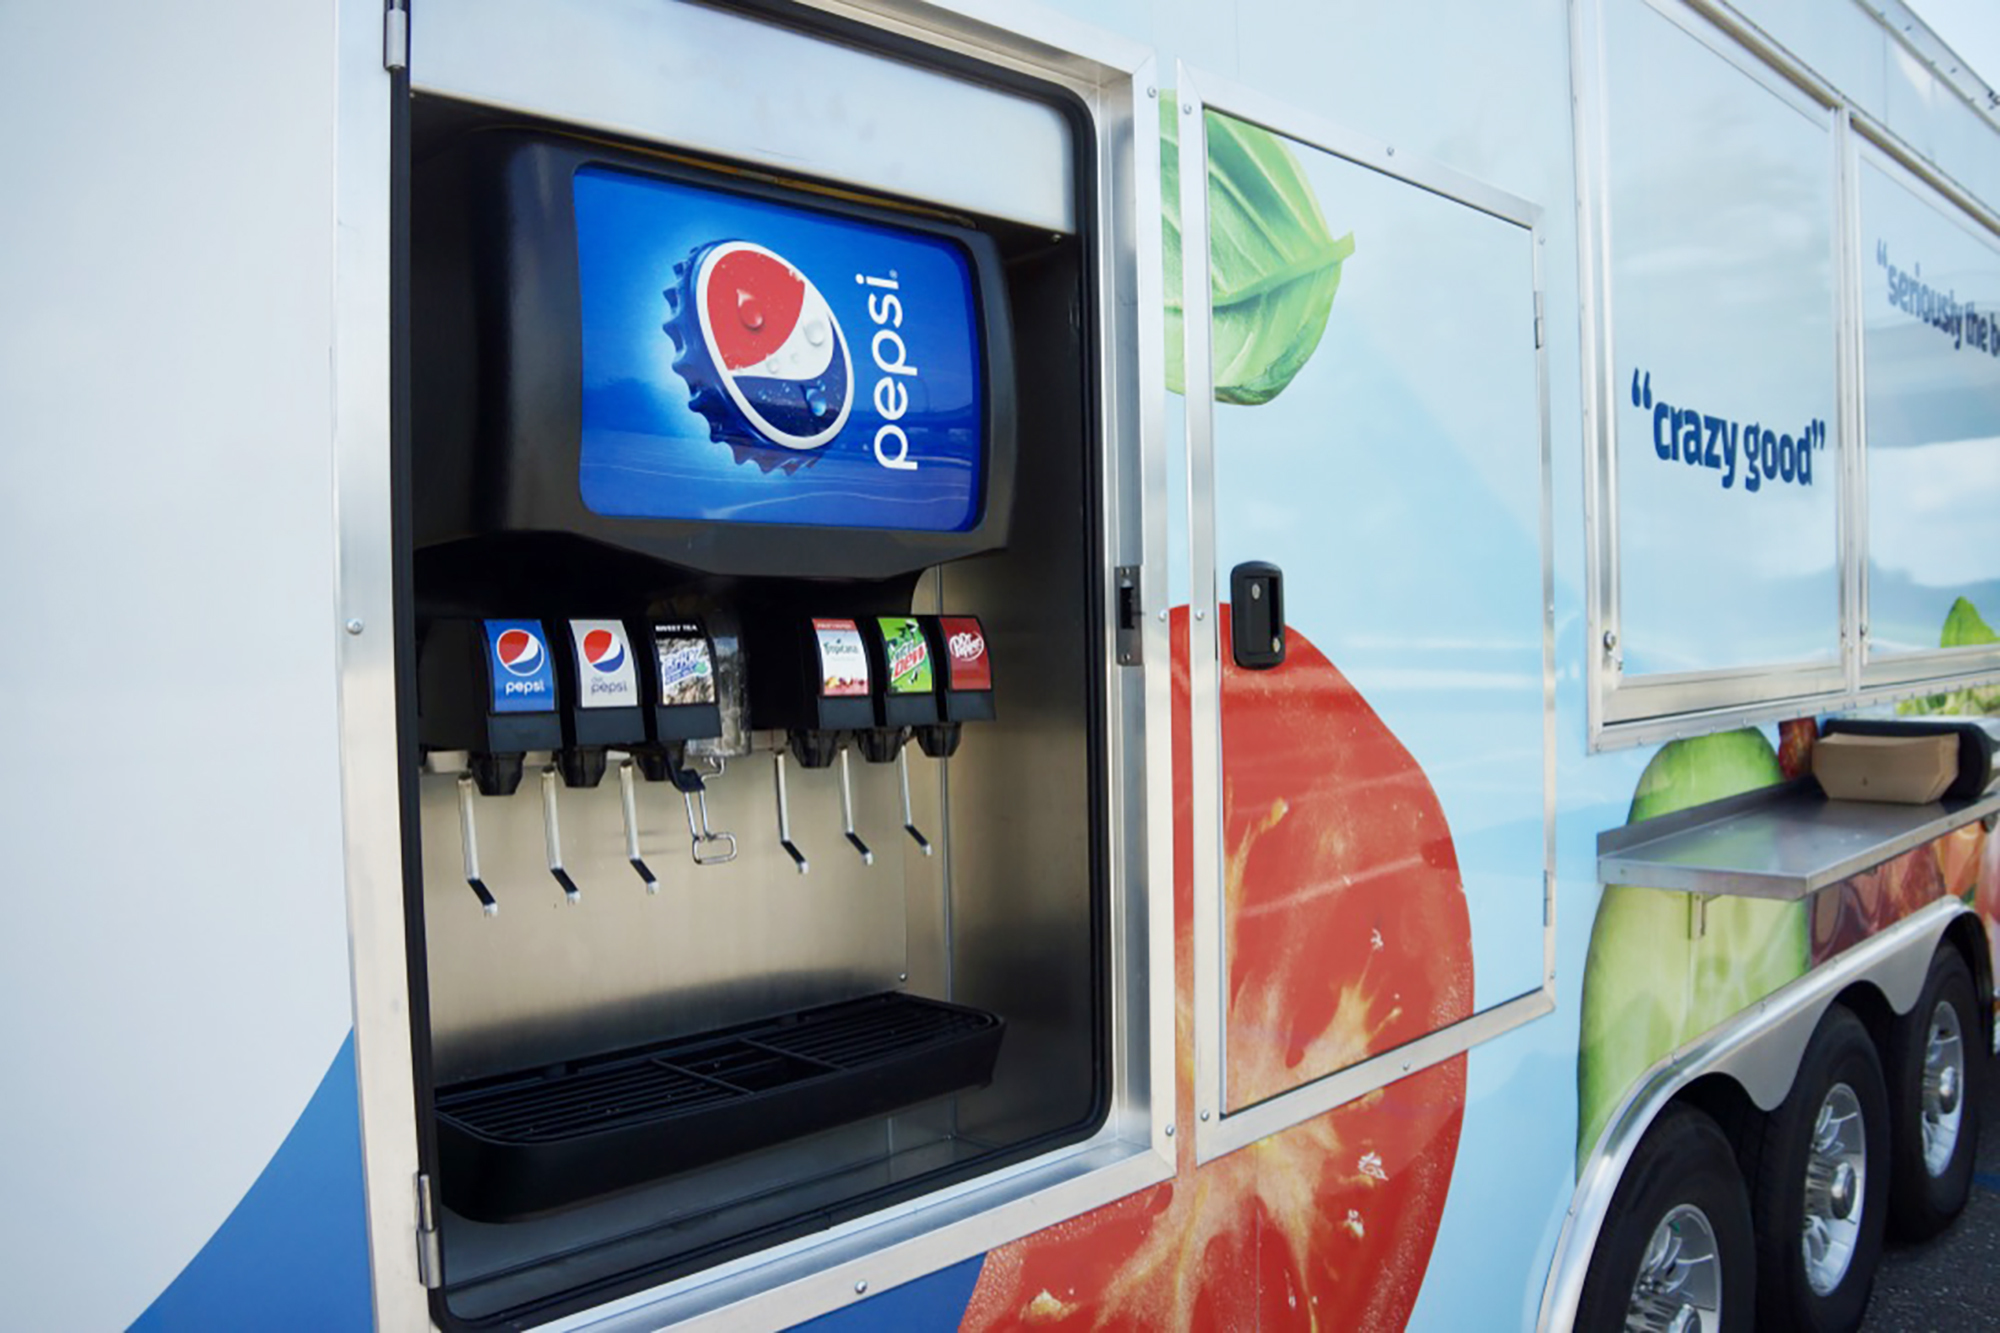 The outside of the truck features two fountain drink stations.